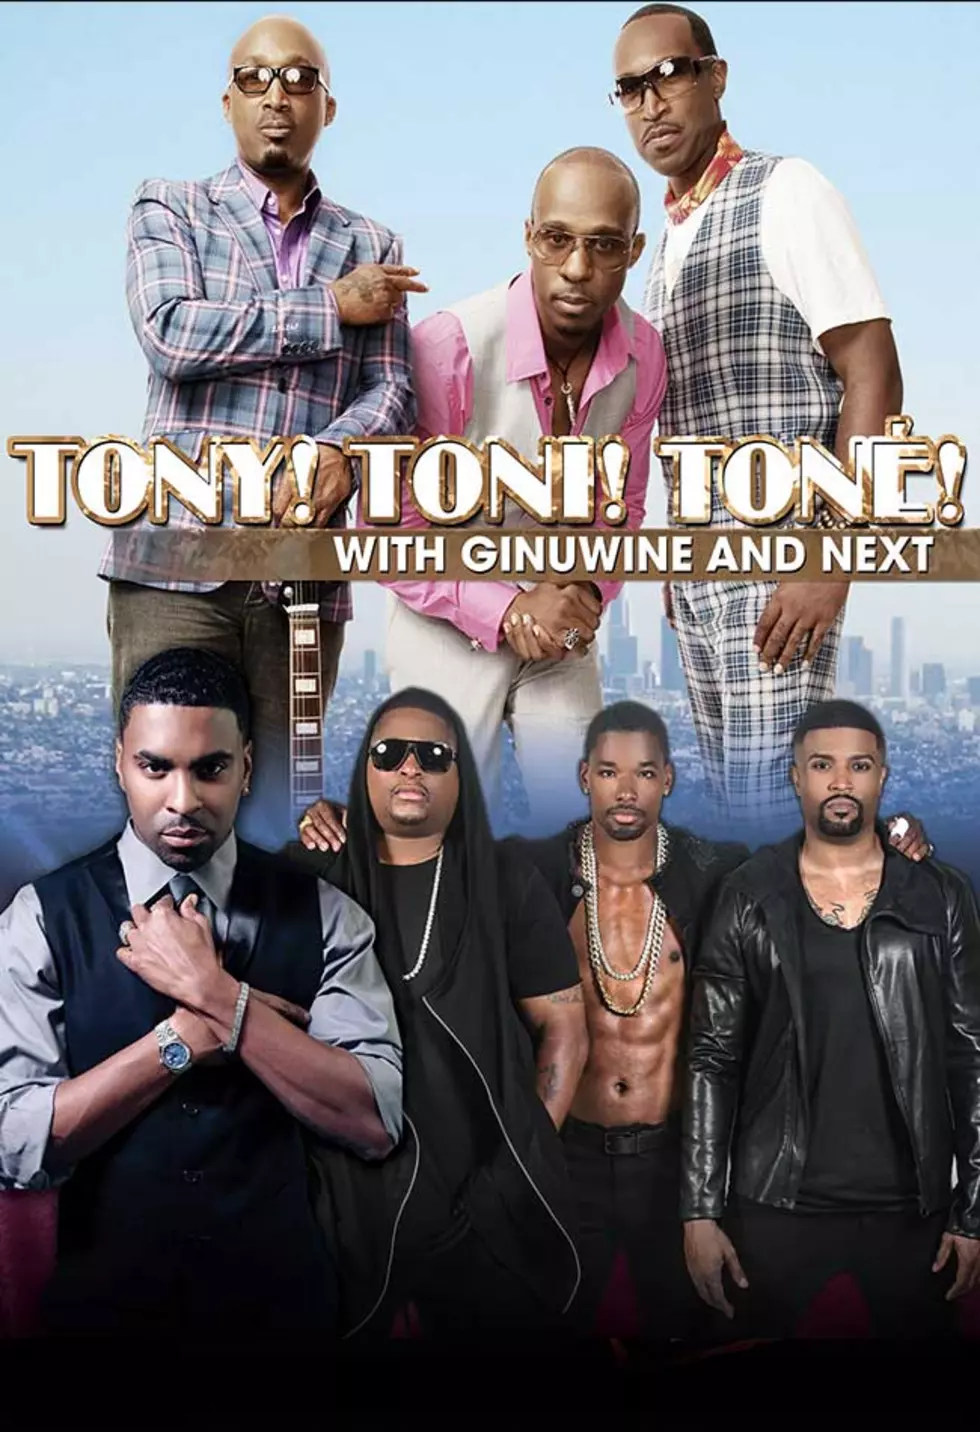 Yasmin Young has your tickets to see Tony, Toni, Tone’ March 18th at Soaring Eagle